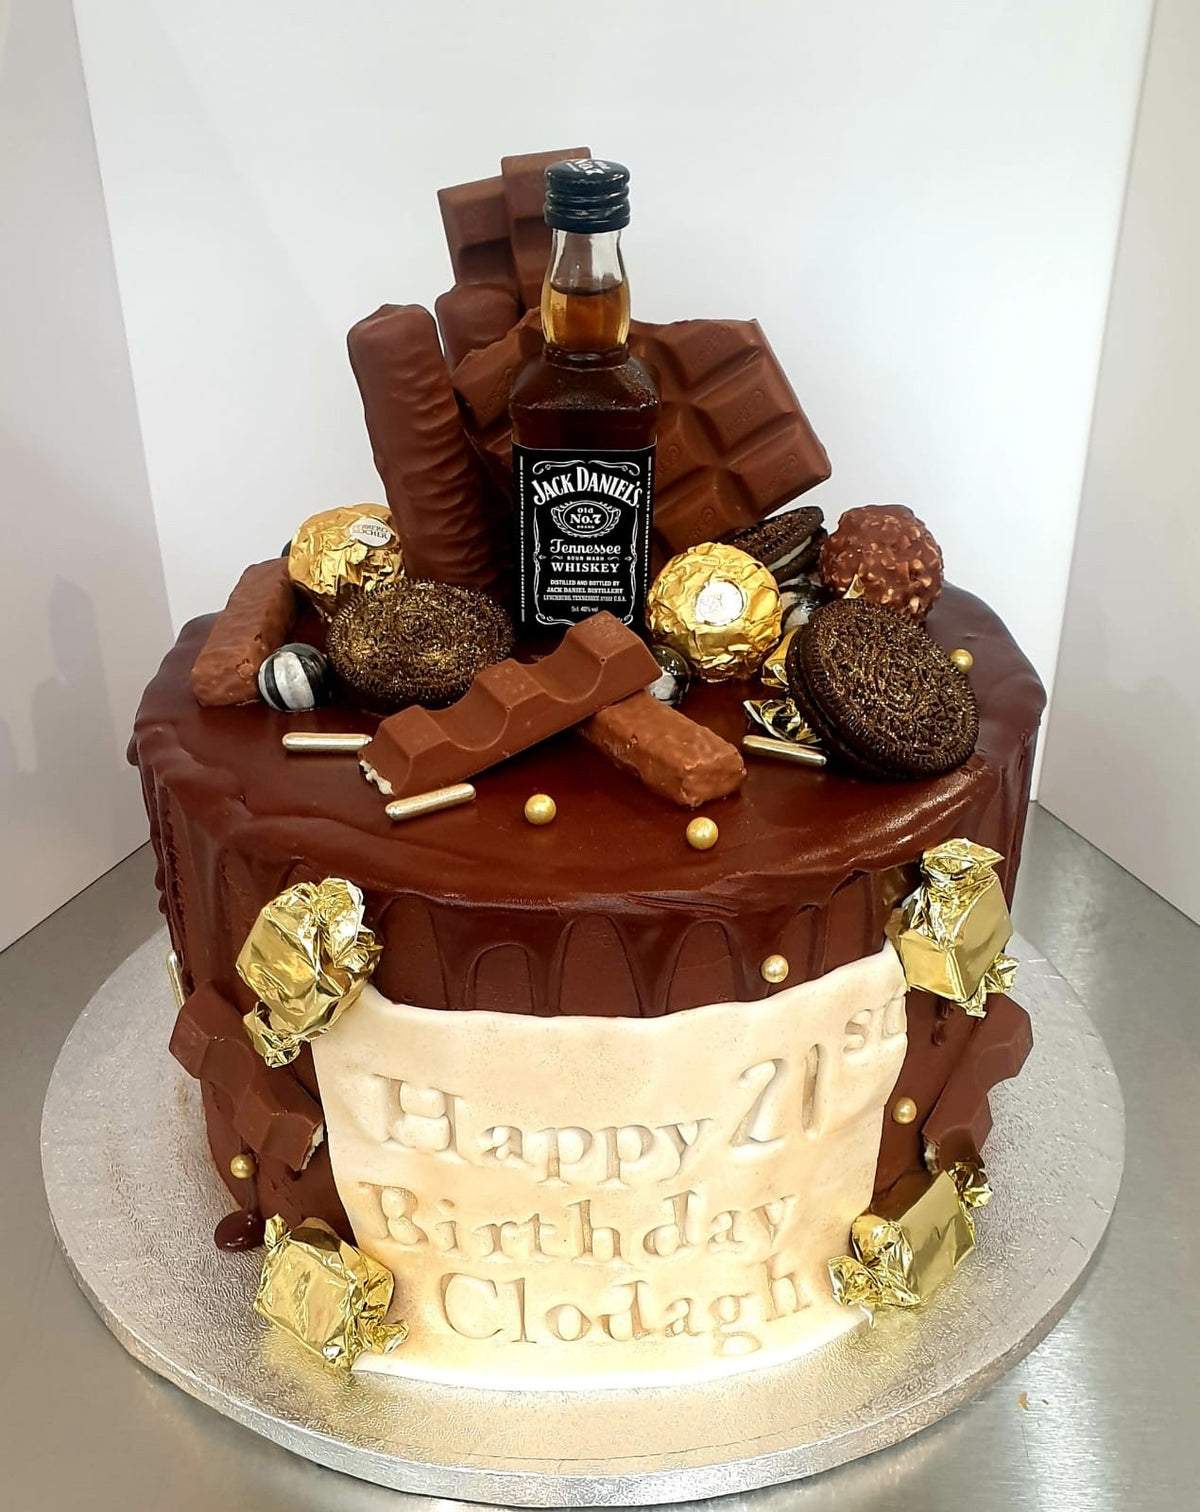 SEND CAKES TO DUBLIN - CAKE DELIVERY IN DUBLIN